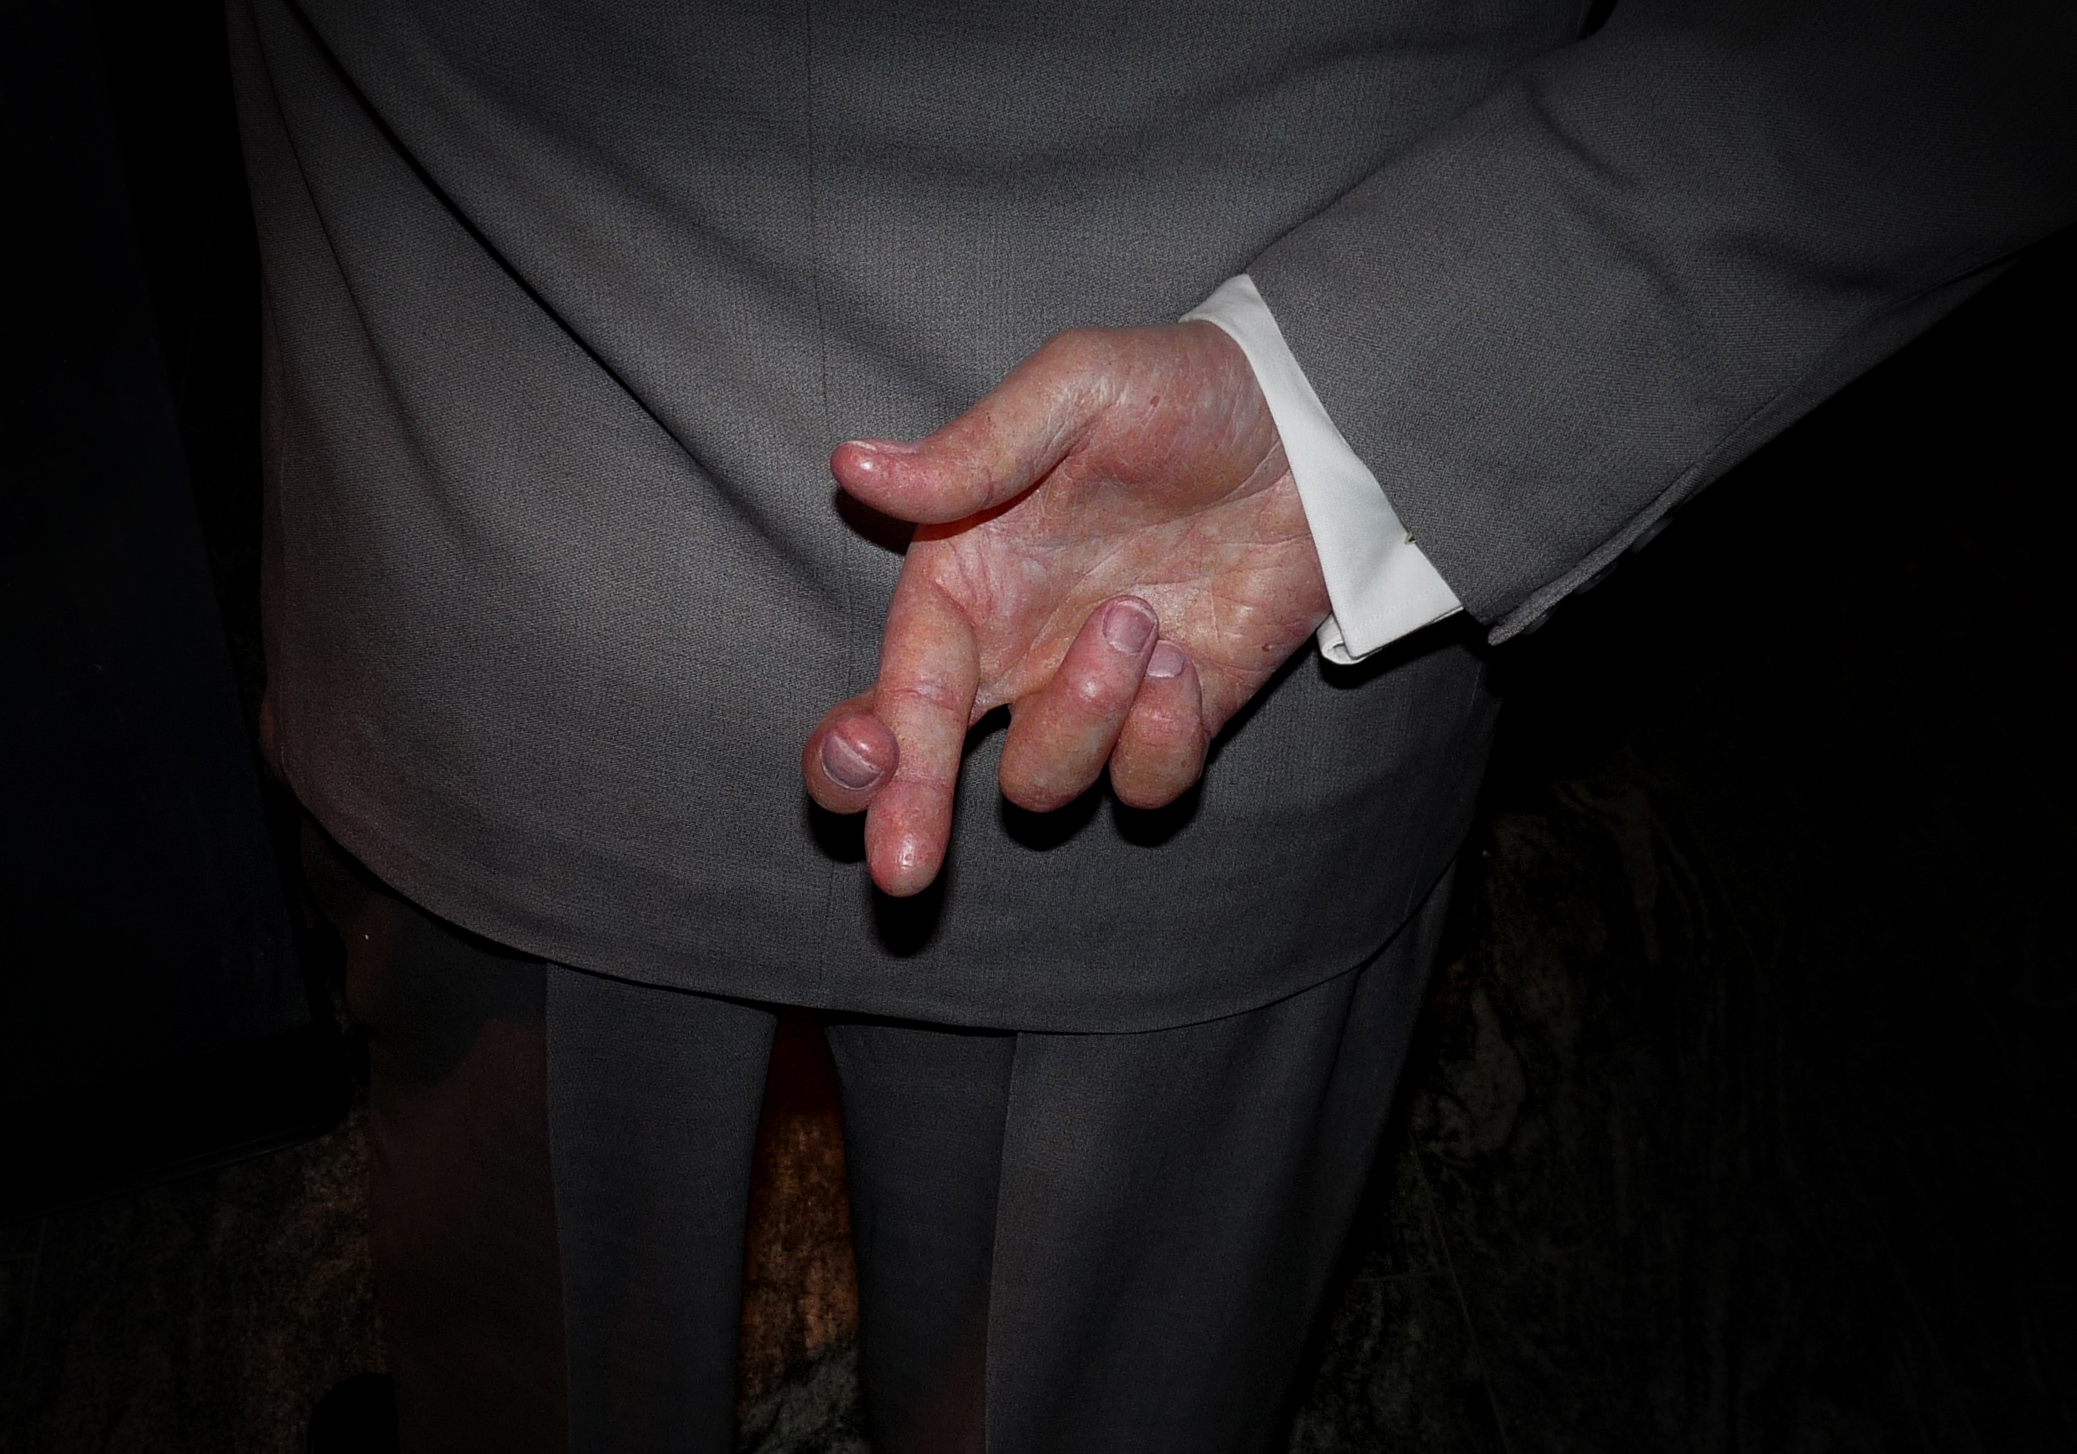 suited old man in shadows crosses his fingers behind his back